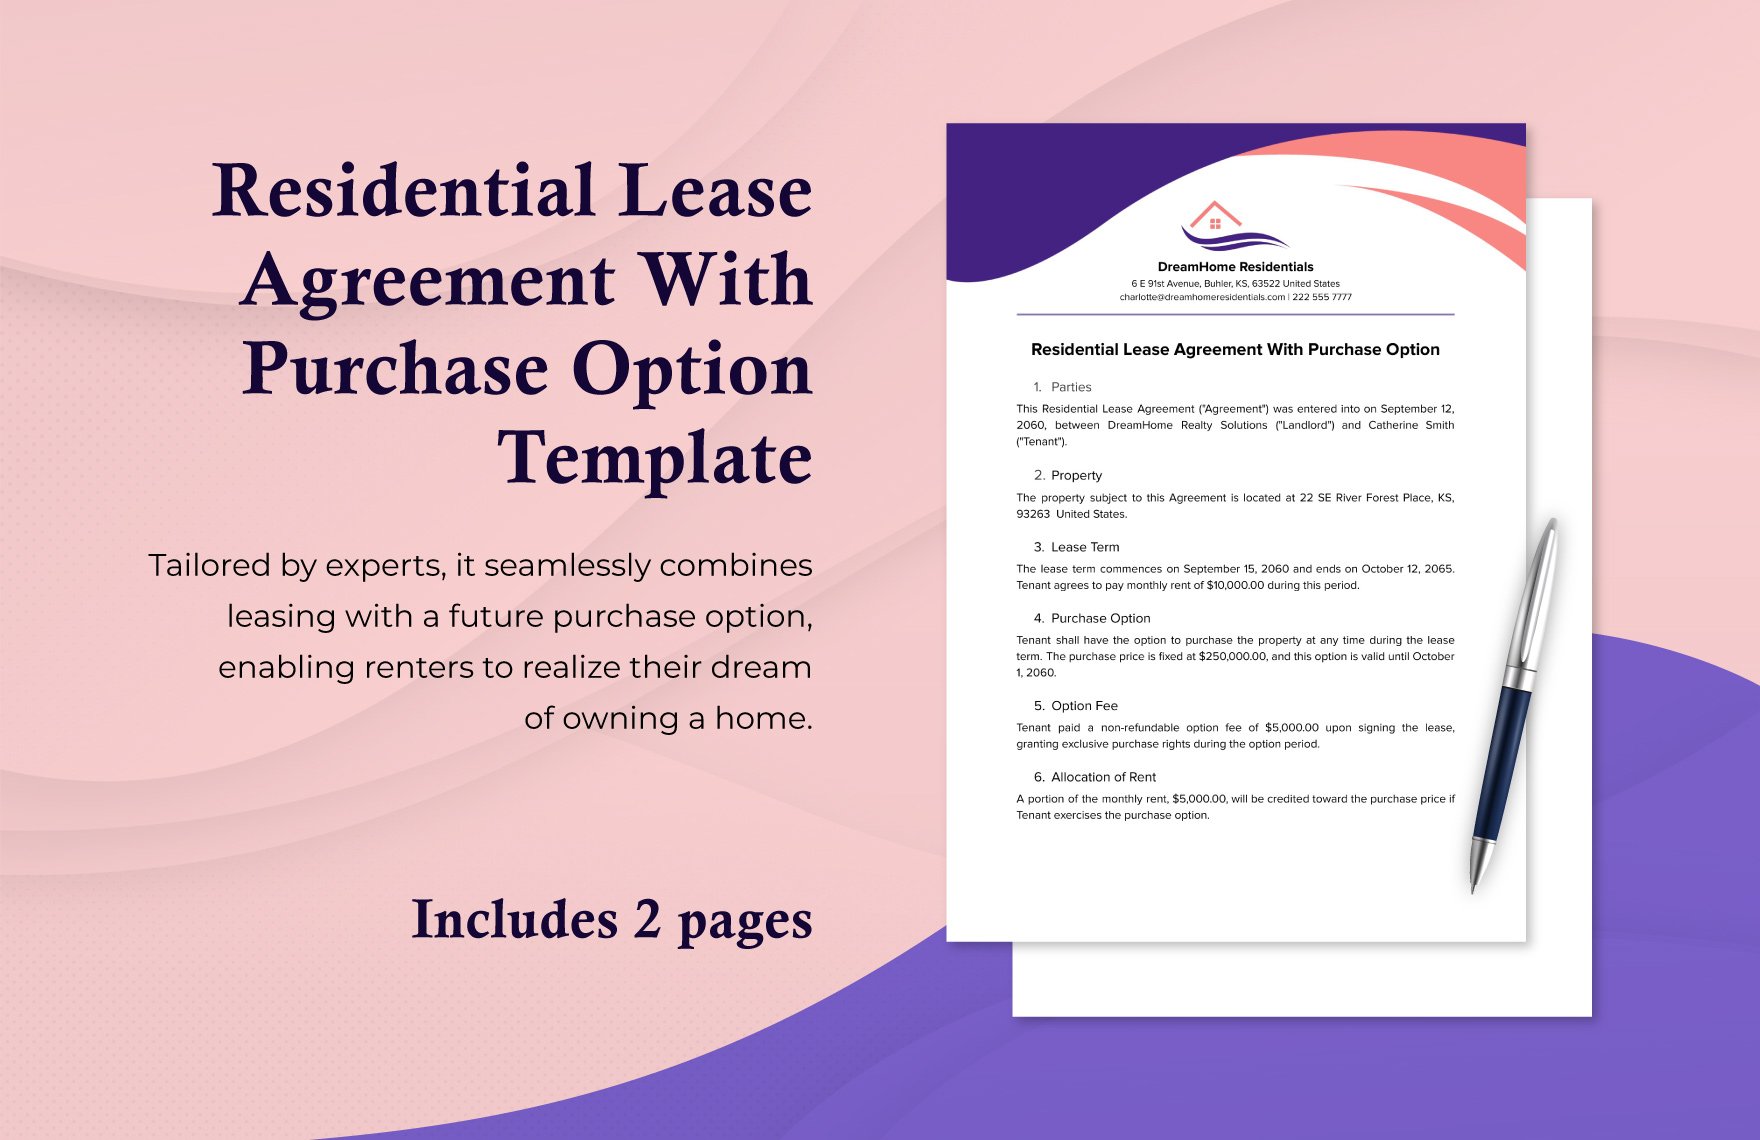 Residential Lease Agreement With Purchase Option Template